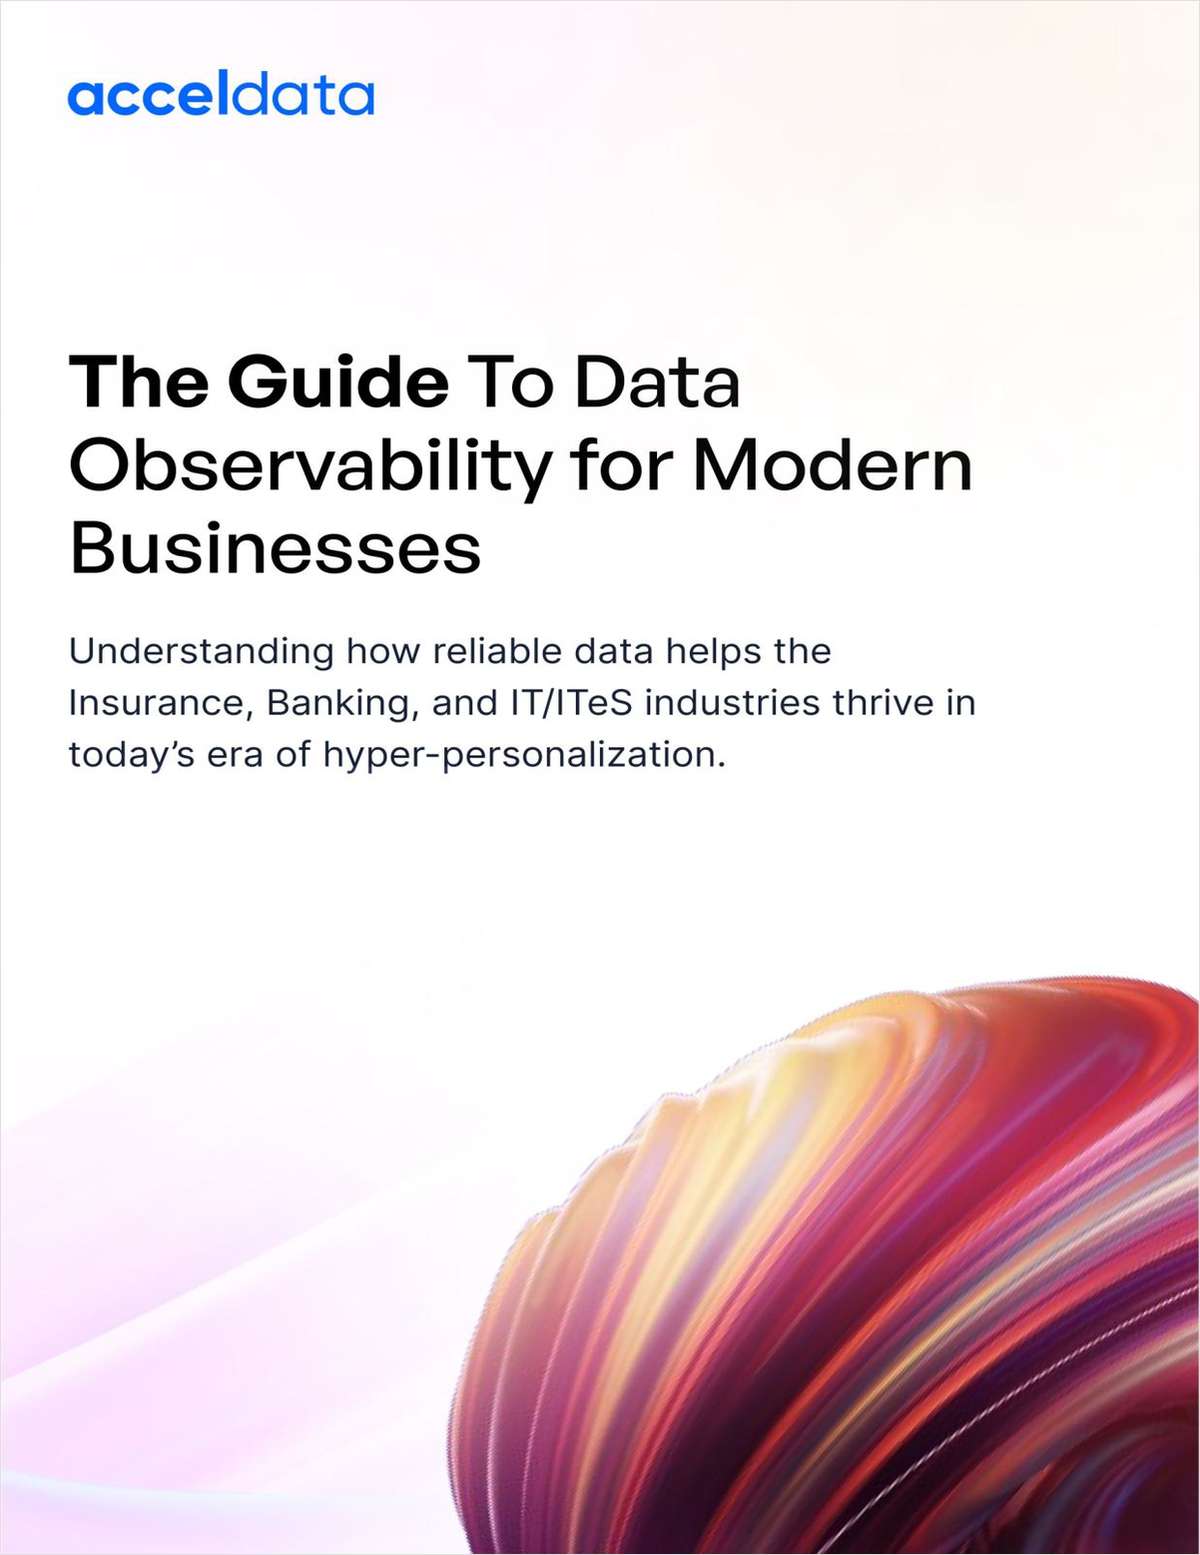 The Guide To Data Observability for Modern Businesses